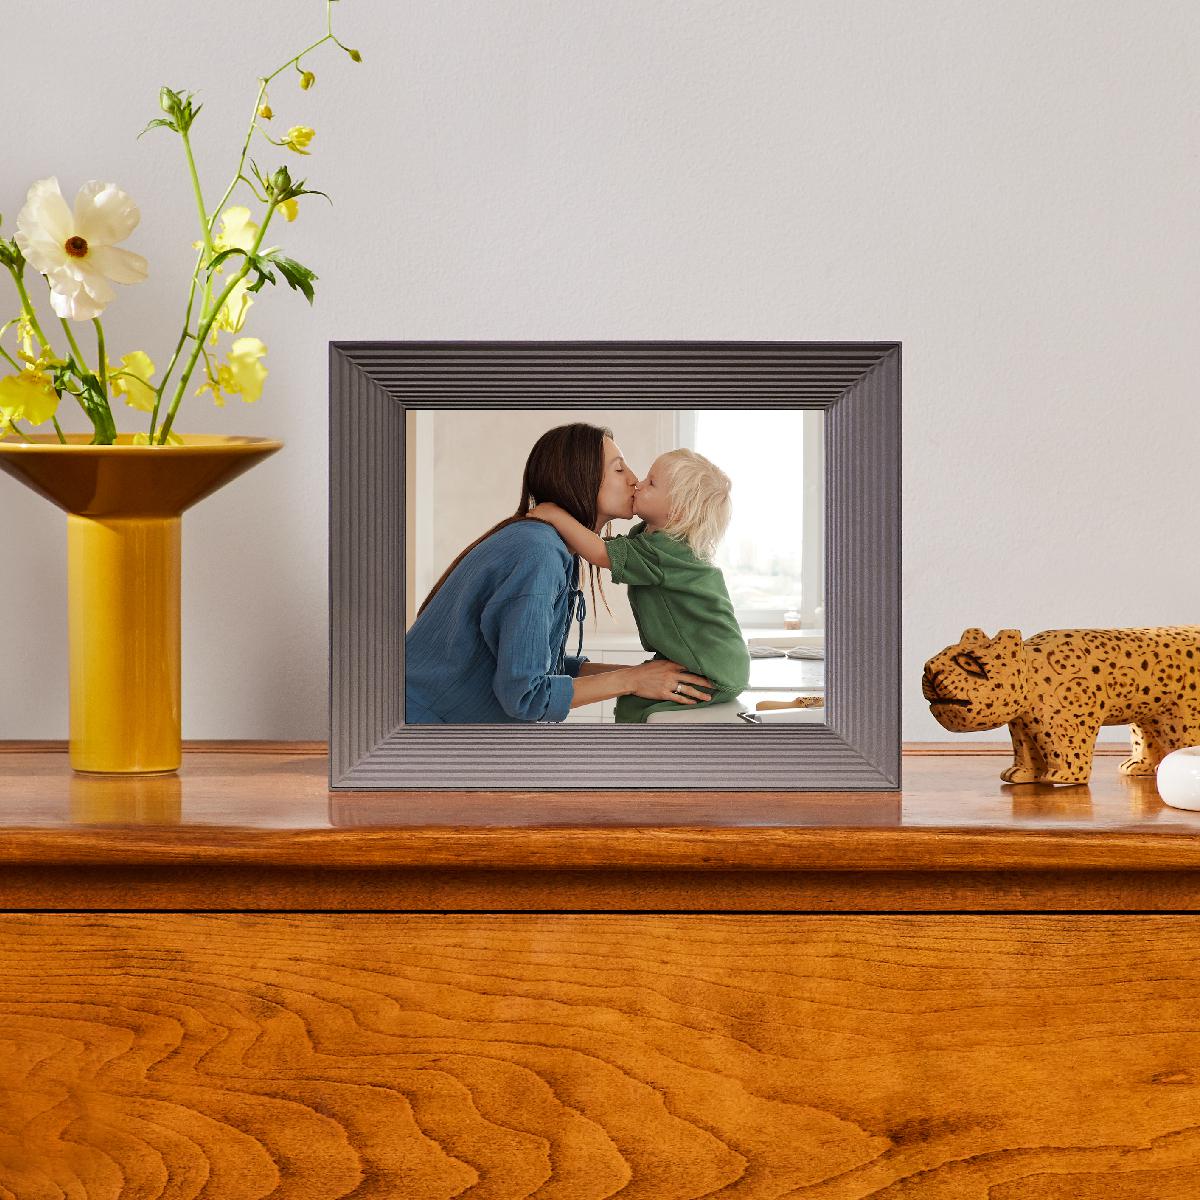 Andraid 11x14 Inch Wood Picture Frame - Set of 4 (Set of 4)